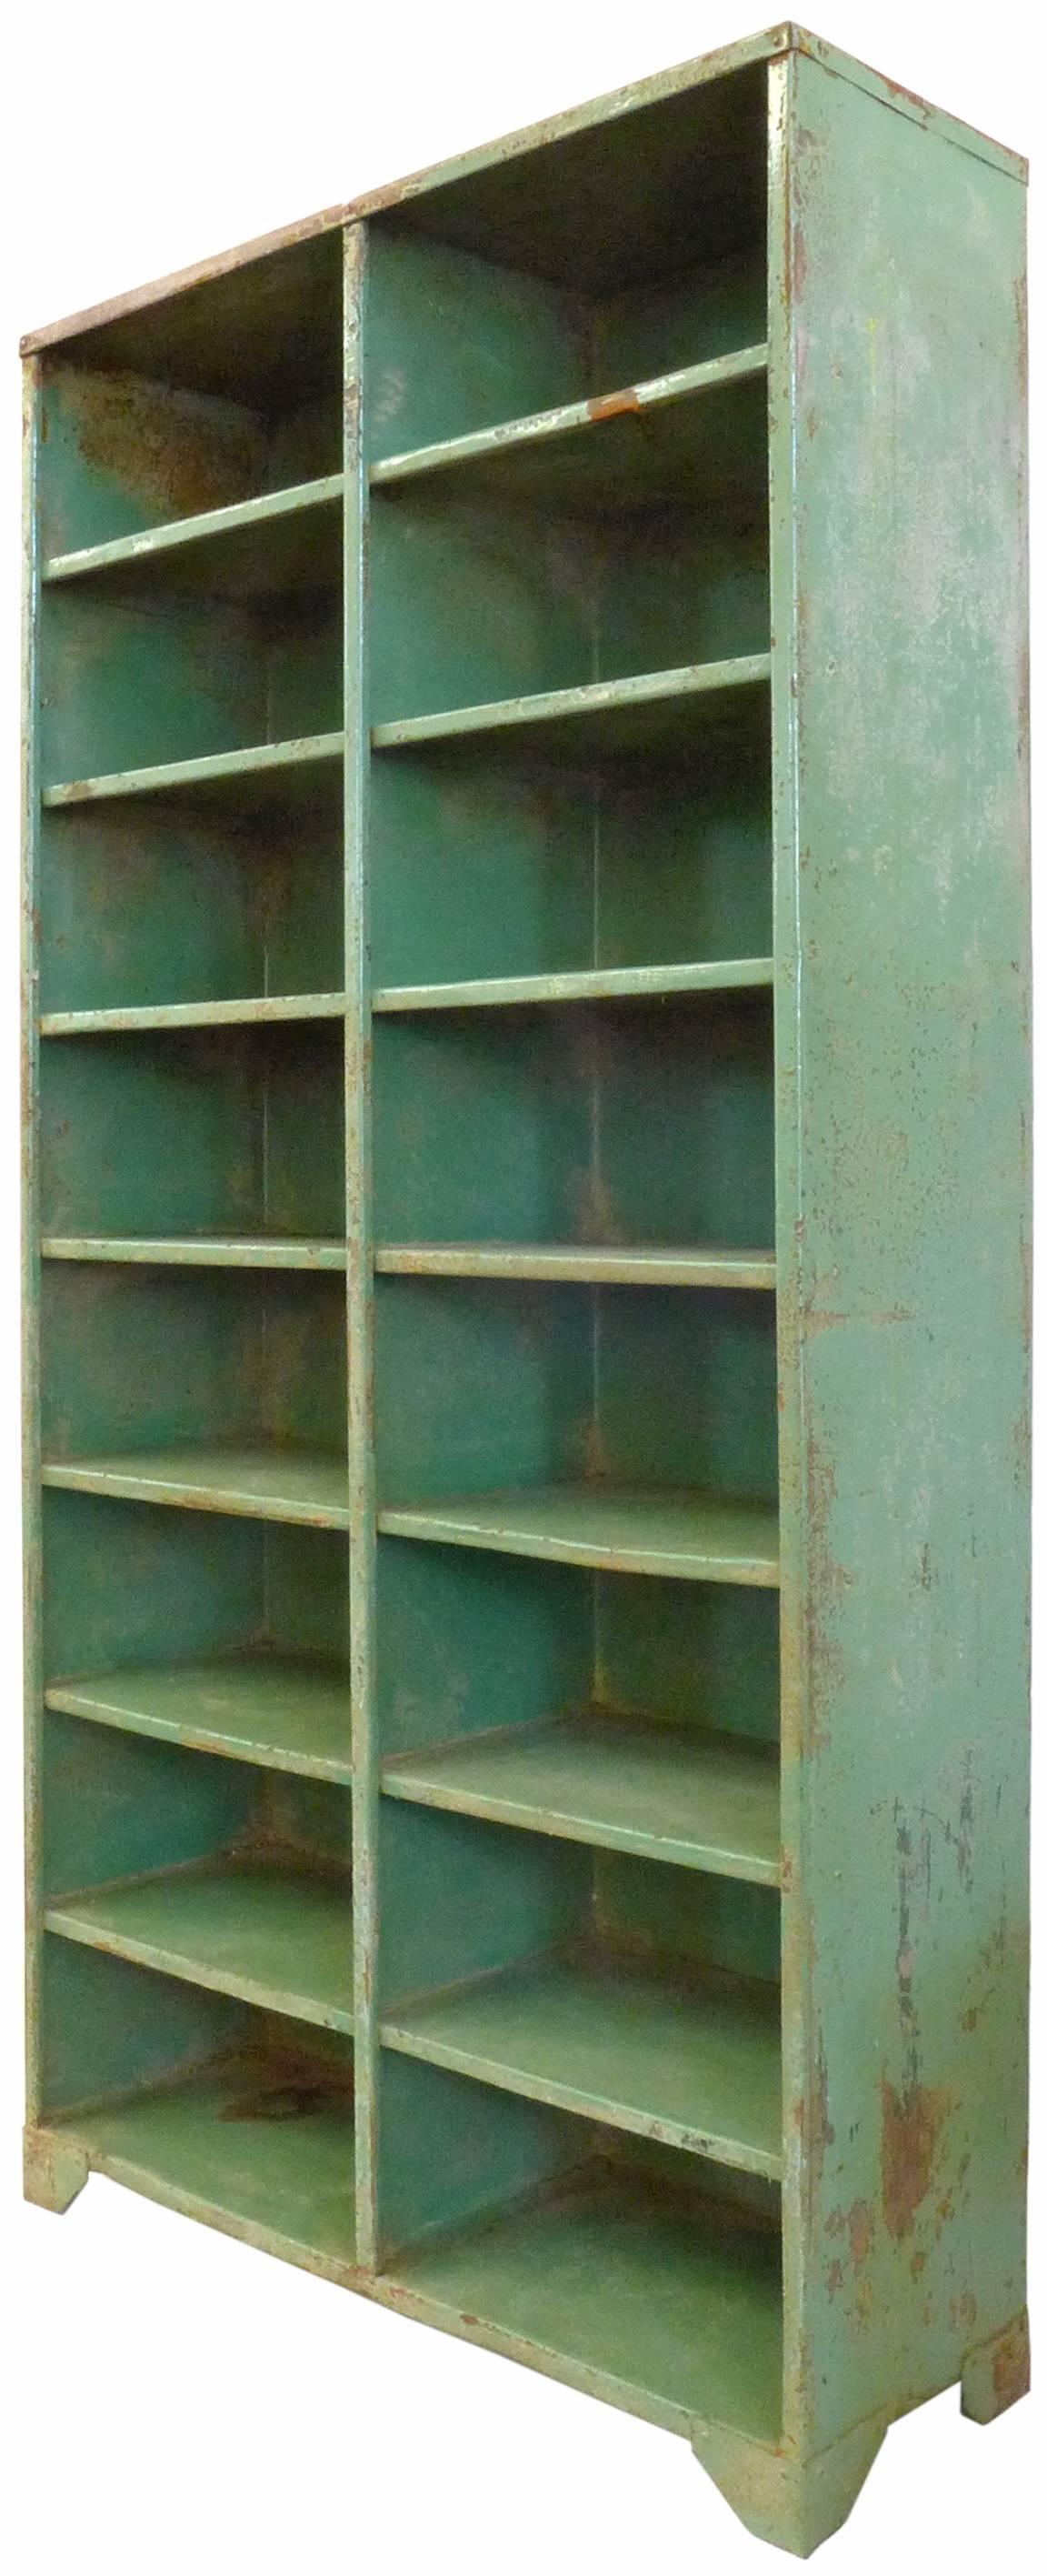 Enameled 1930s French Industrial Shelving Unit For Sale